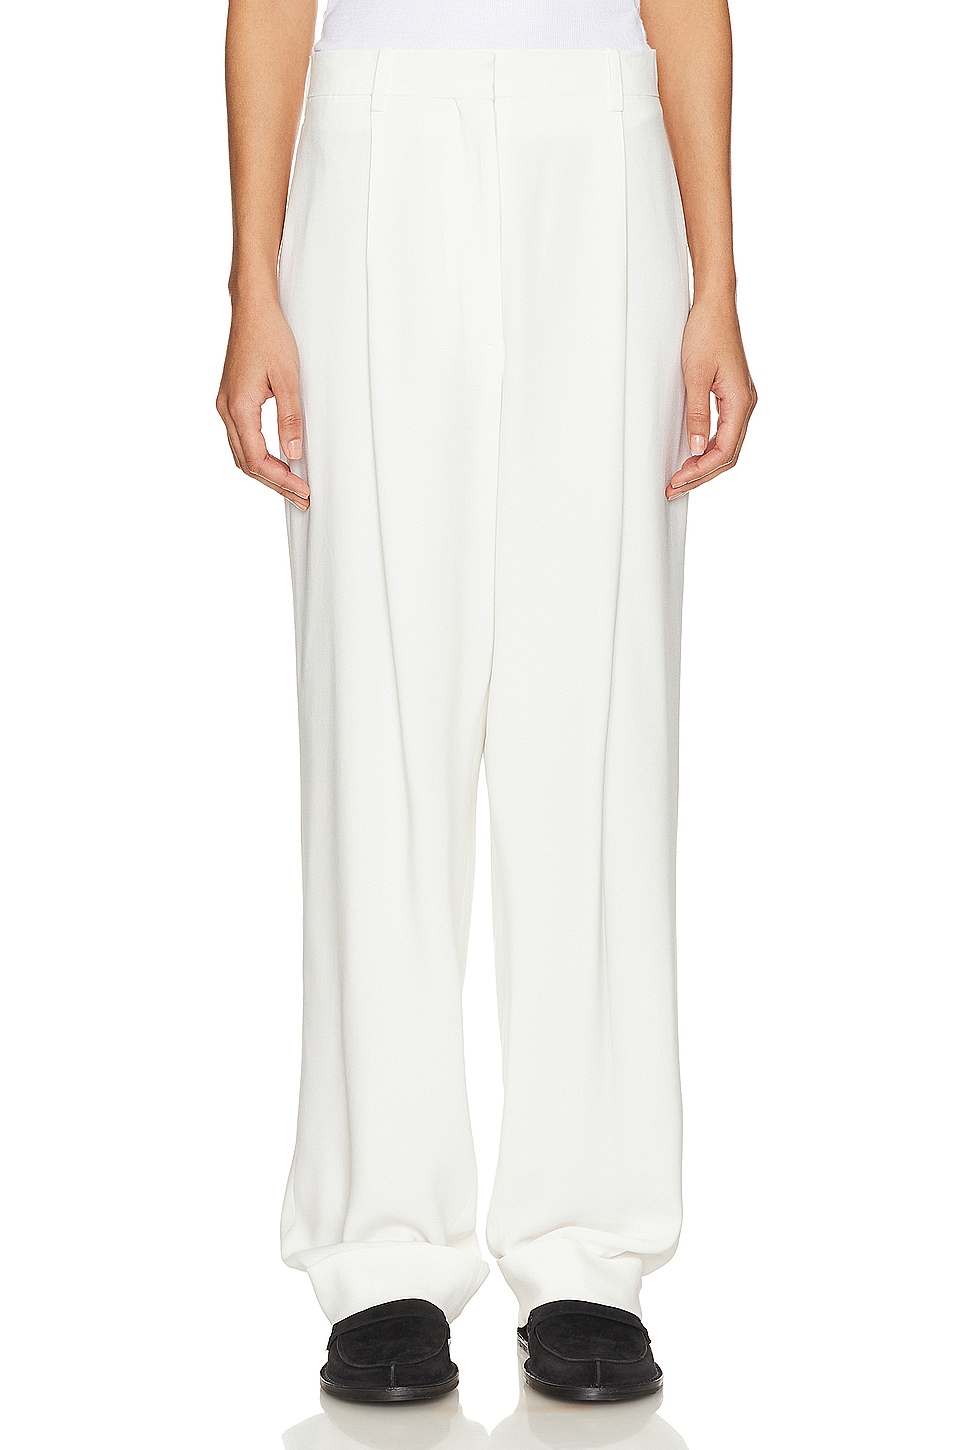 Image 1 of The Row Tor Pant in White